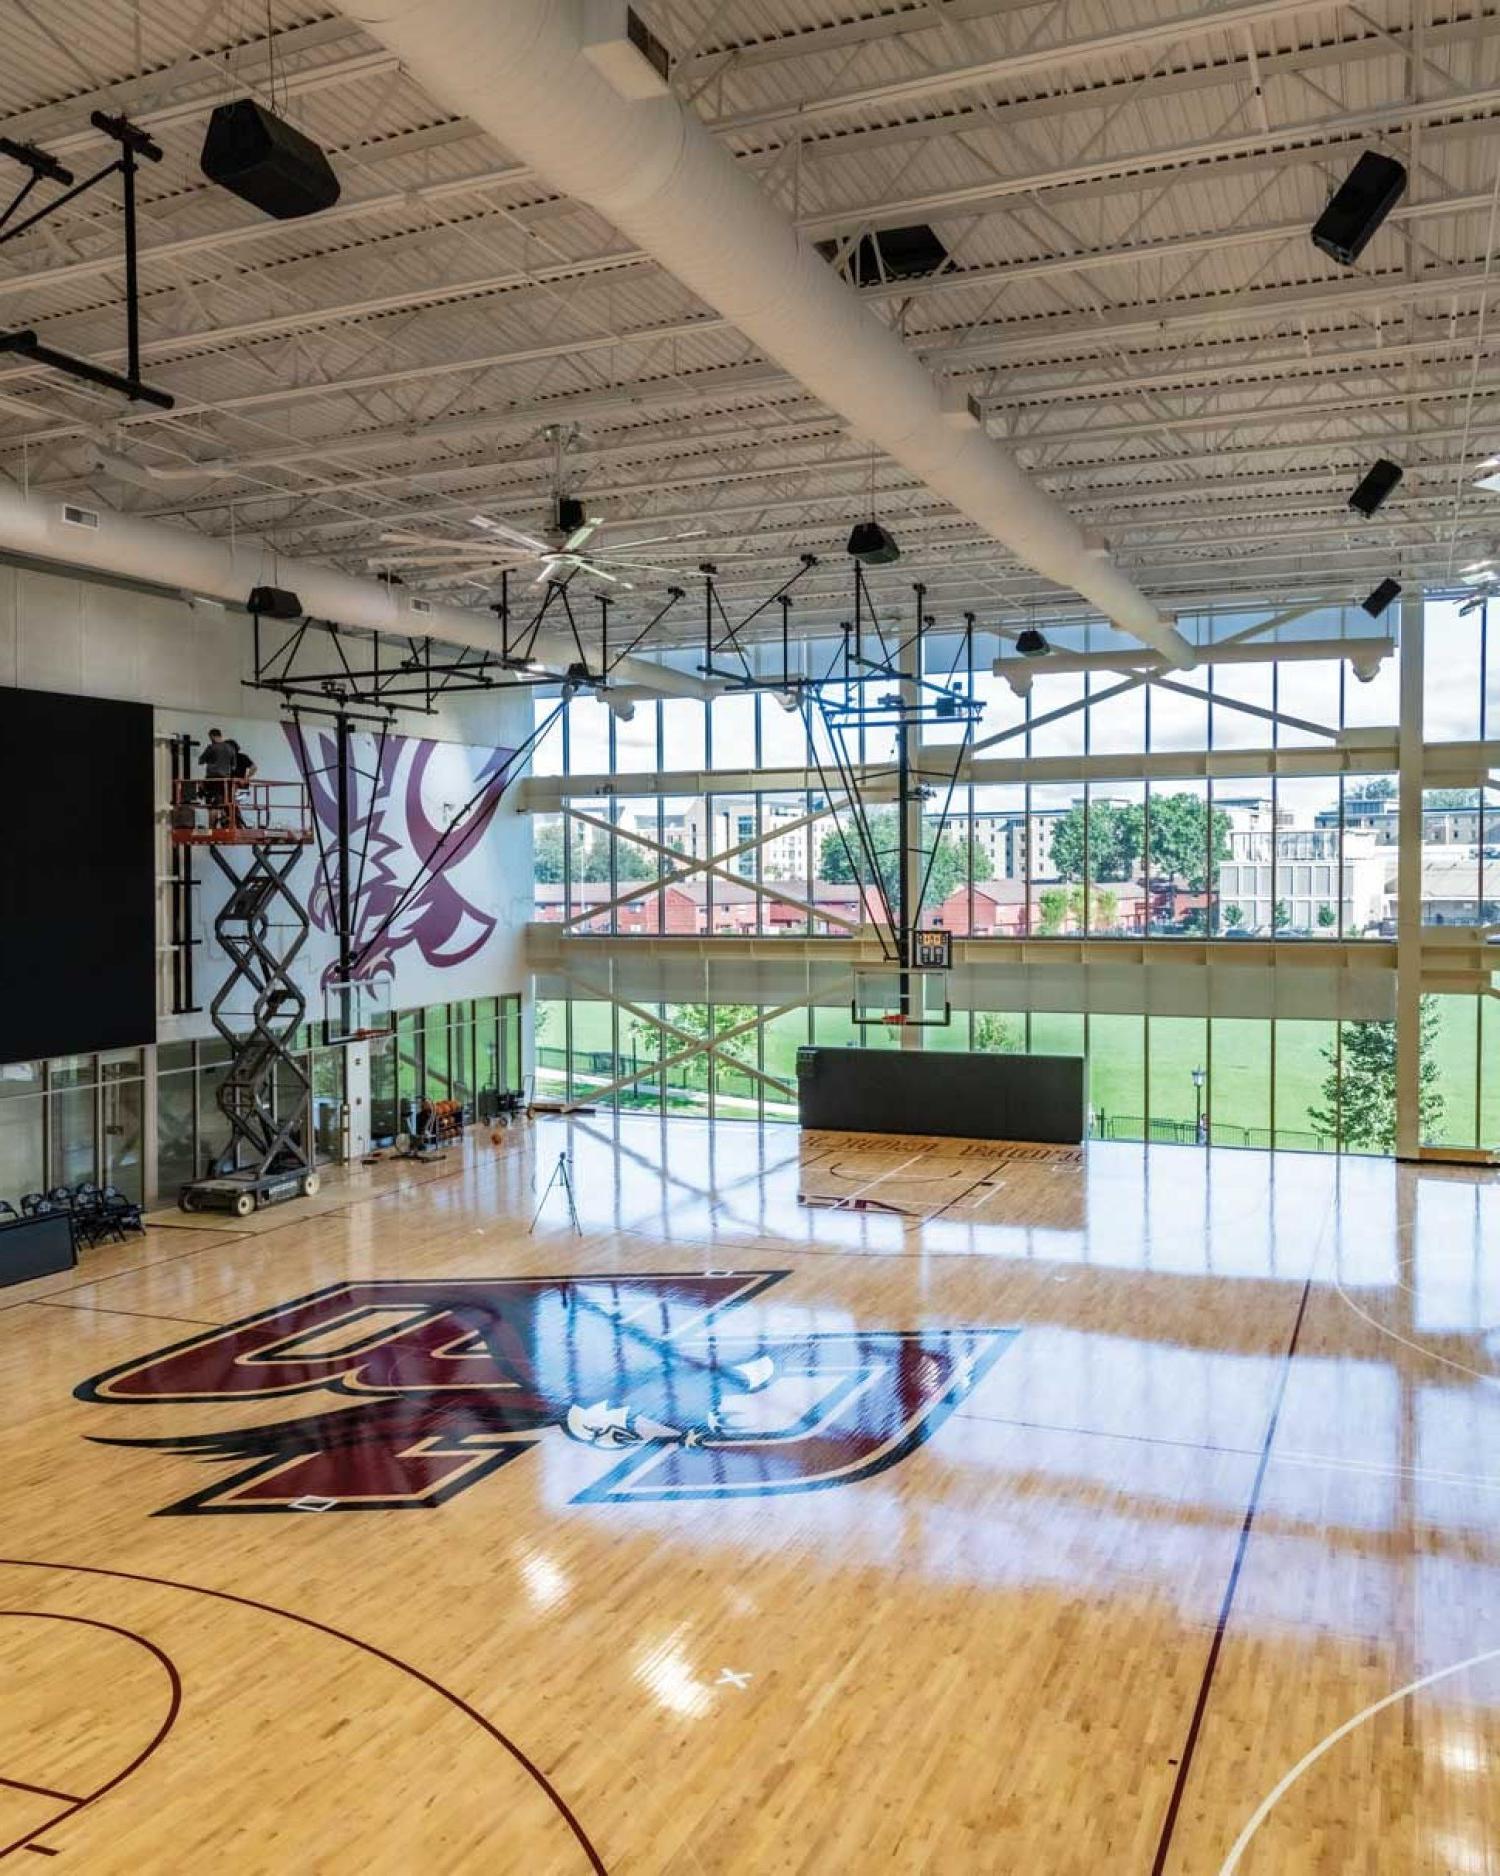 Photo from a catwalk of the new Hoag Pavilion practice basketball court